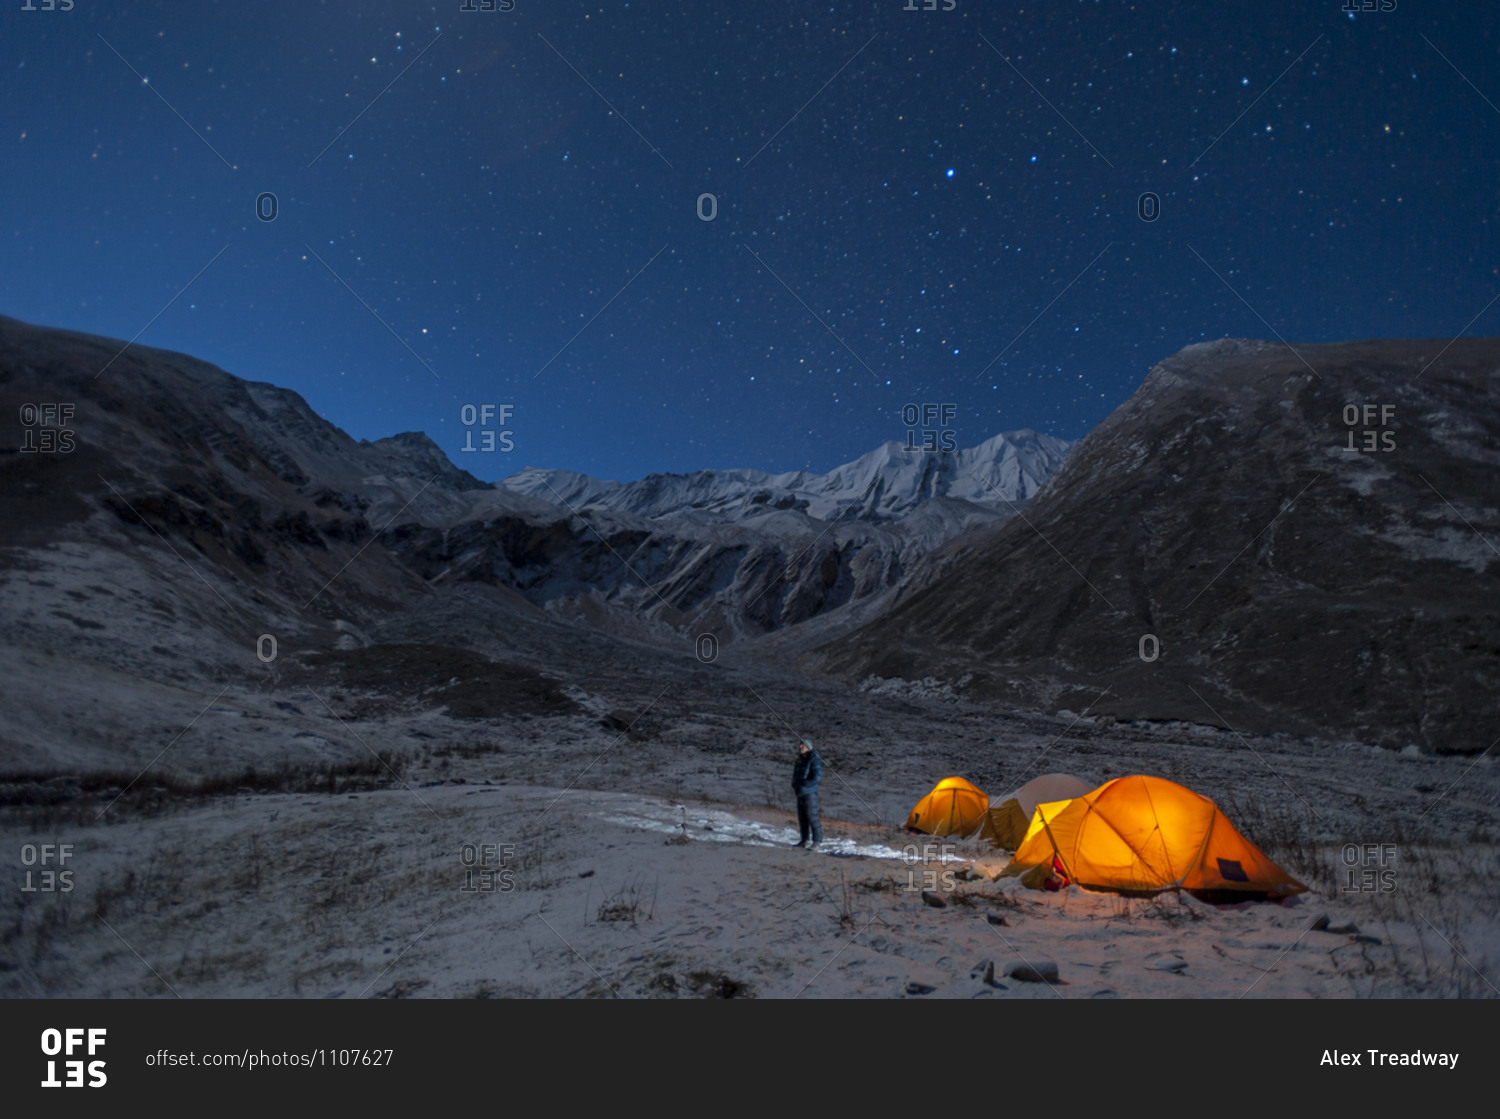 In the little explored Juphal valley in the remote Dolpa region of Nepal, a man stands outside his tent on a cold night to look at the stars